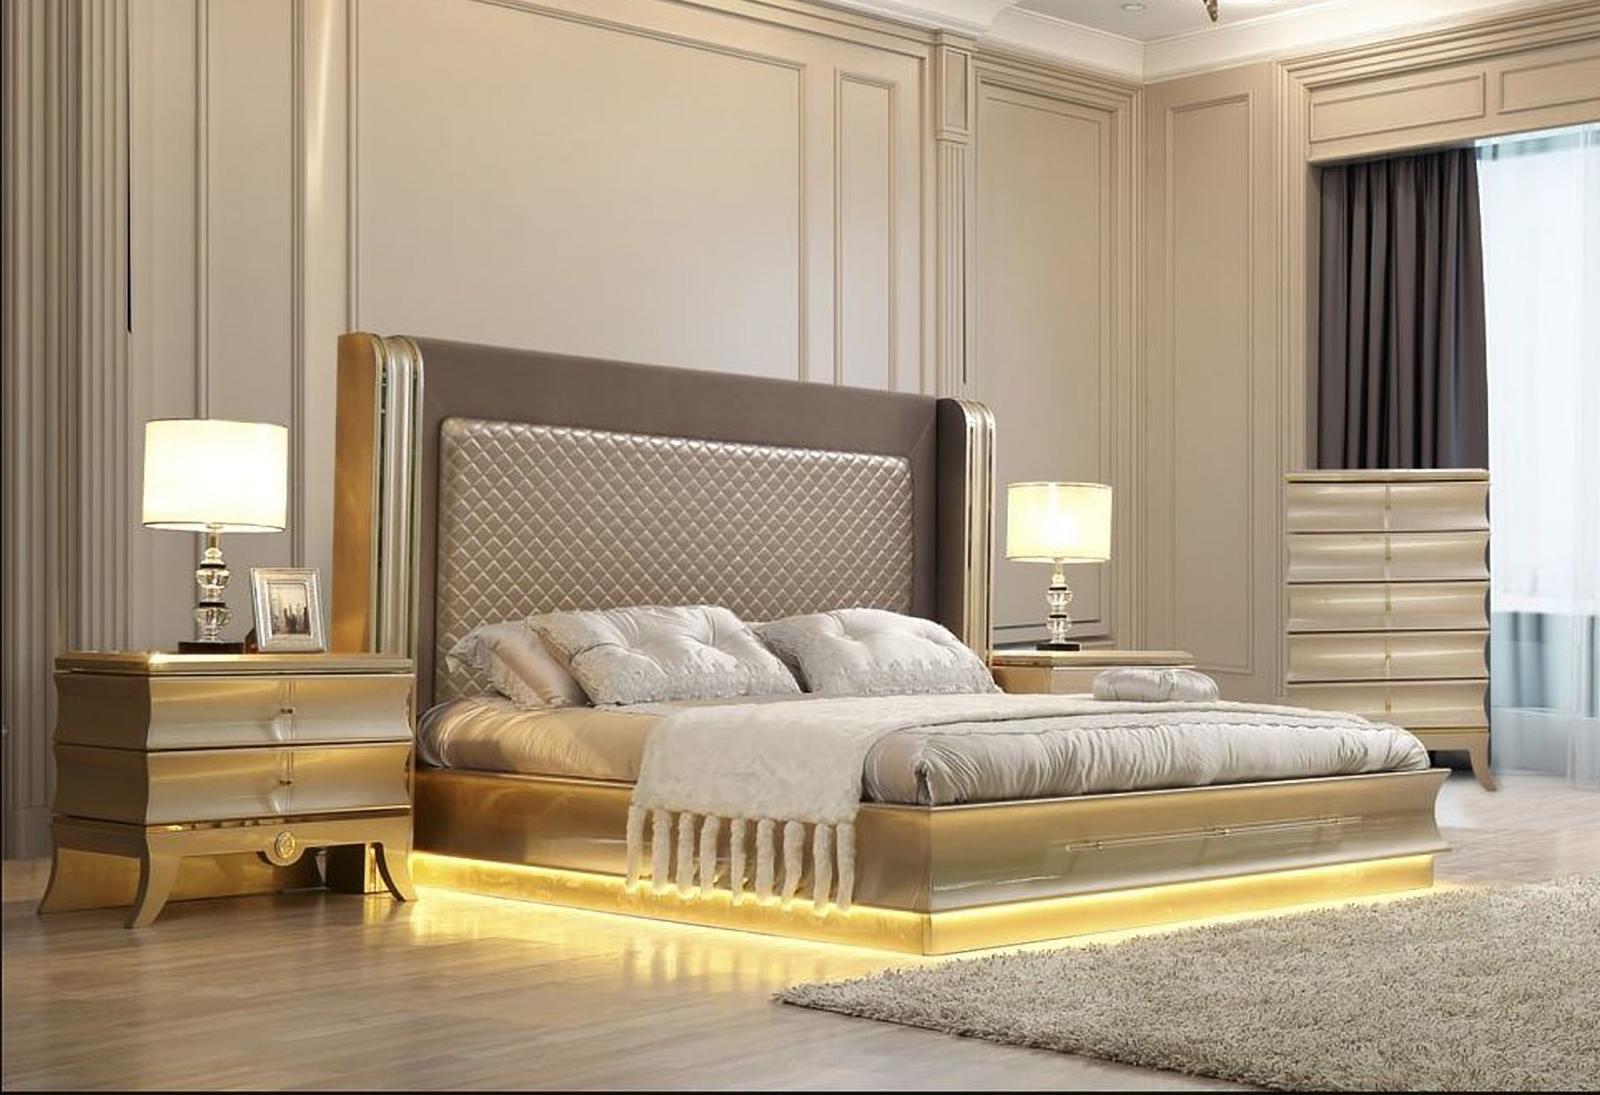 

    
Glam Belle Silver & Gold King Bedroom Set 3Pcs Contemporary Homey Design HD-925
